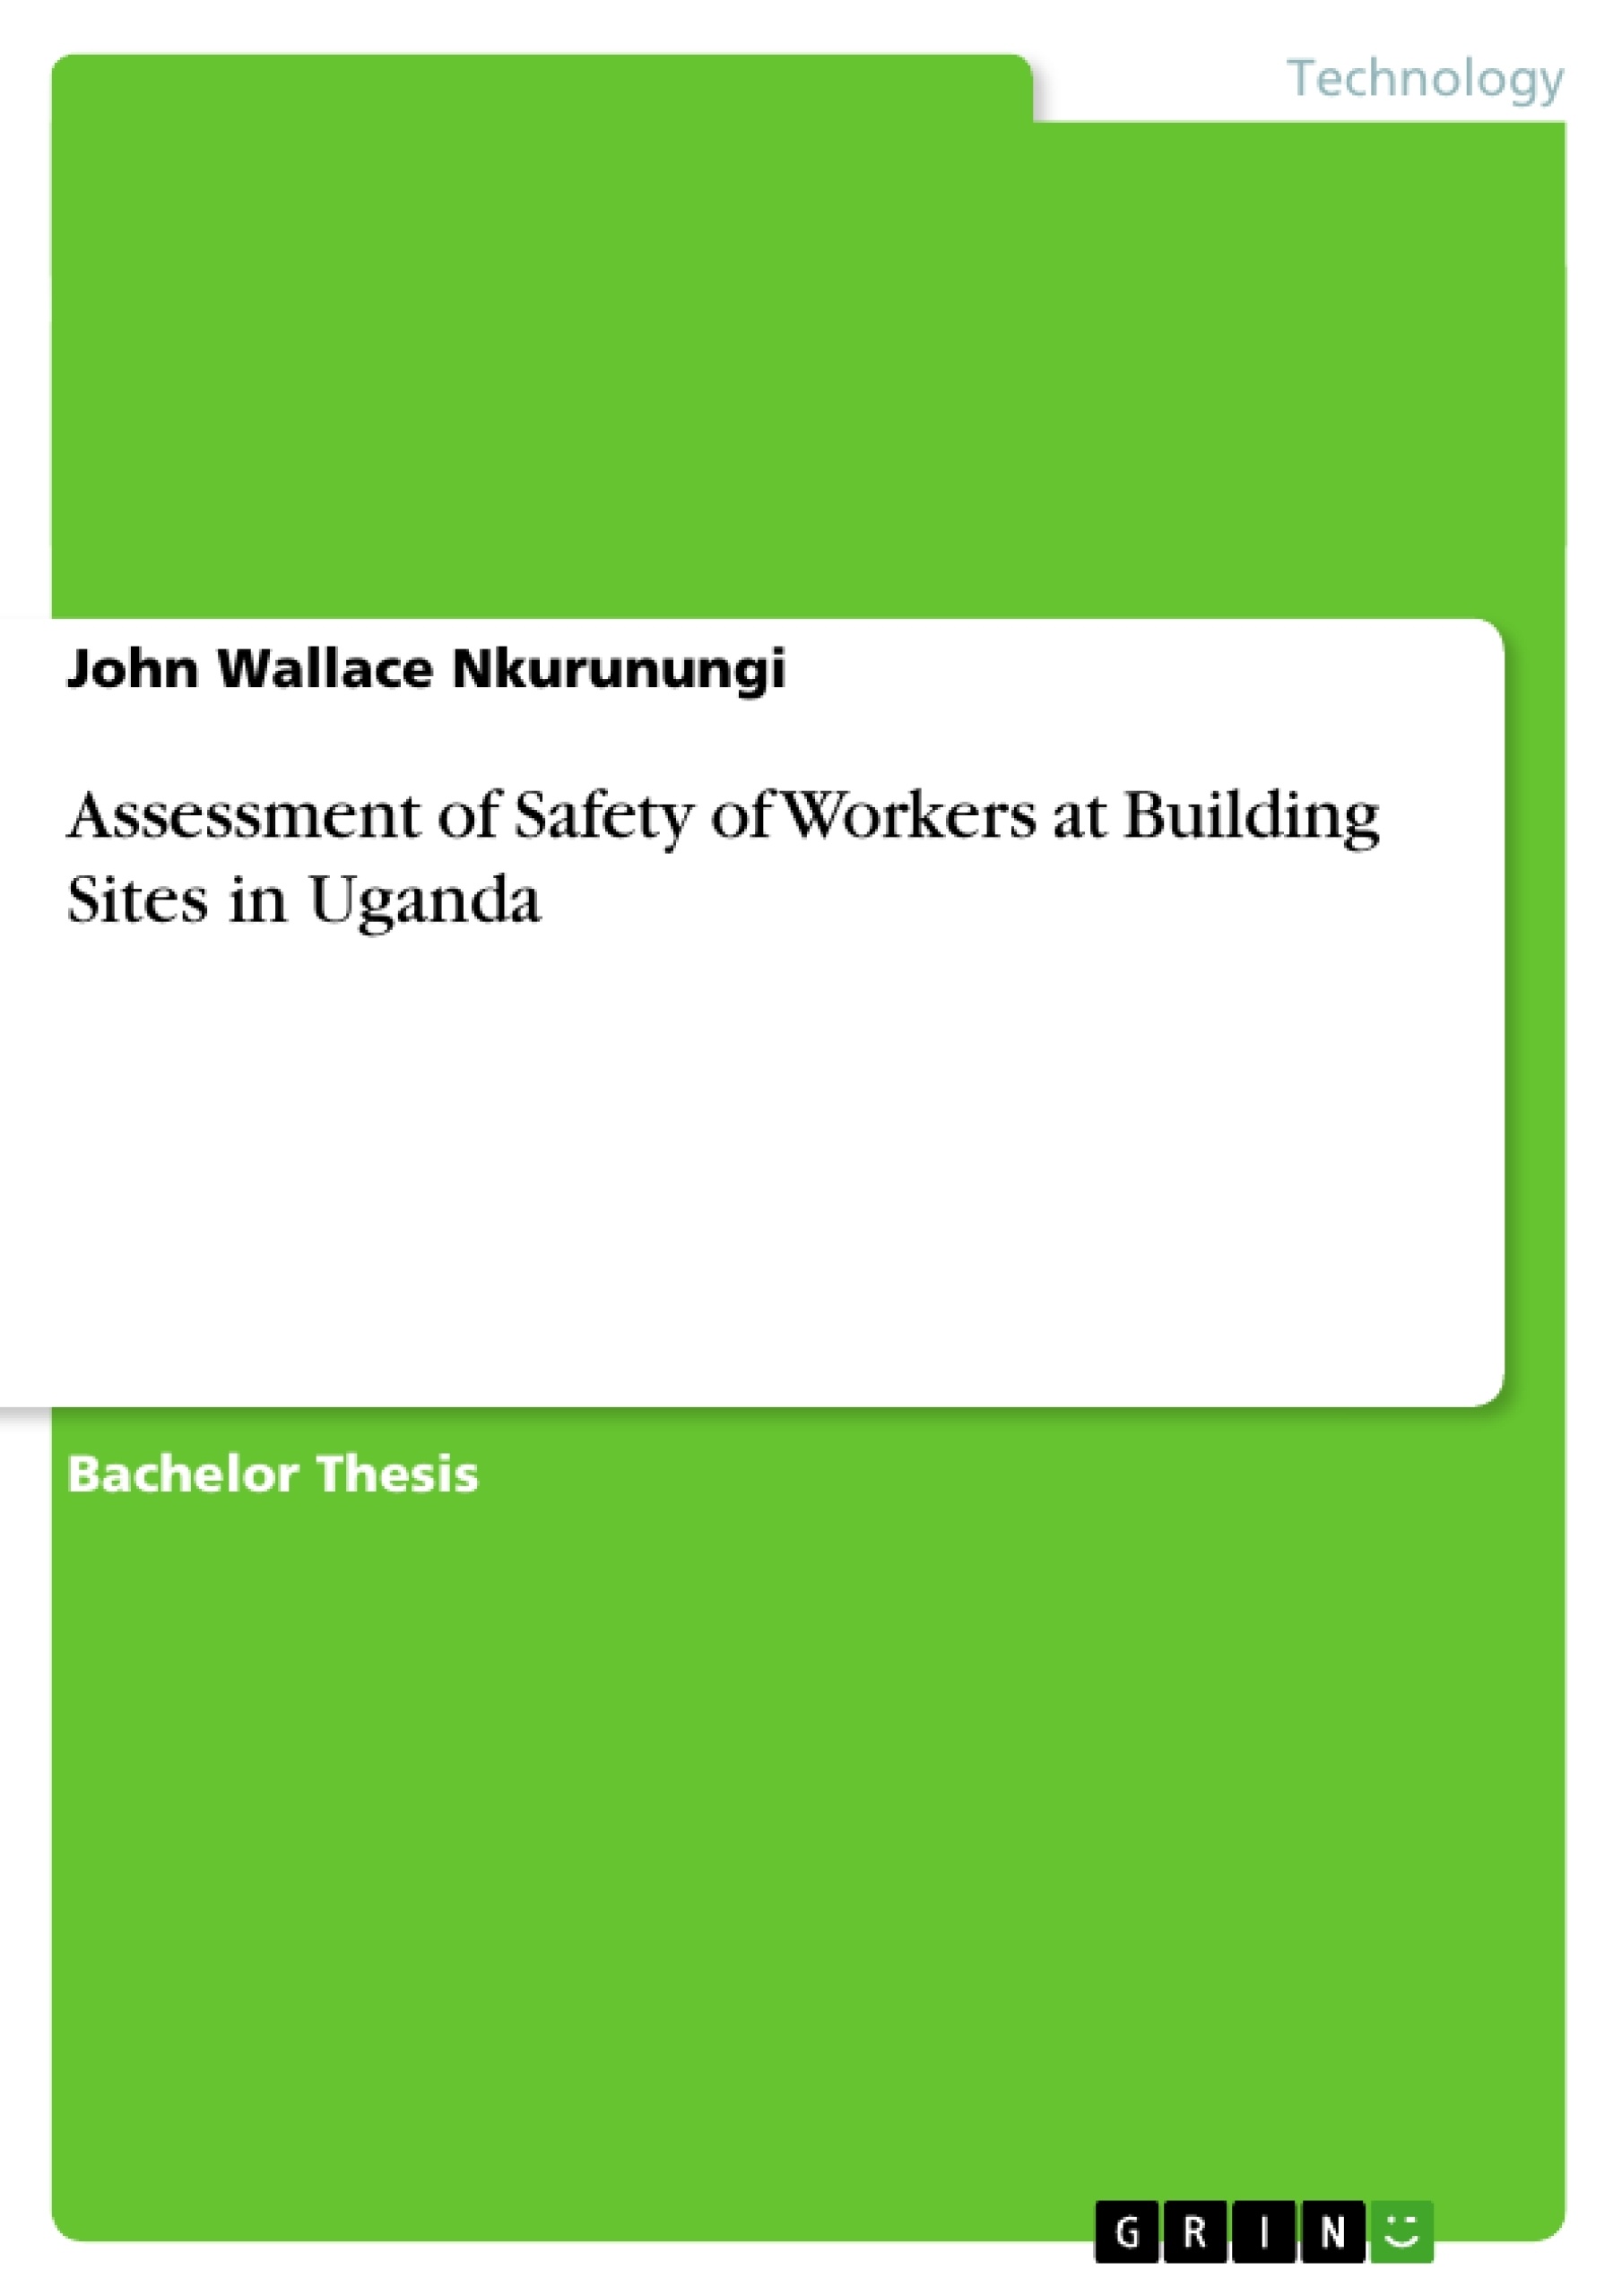 Title: Assessment of Safety of Workers at Building Sites in Uganda